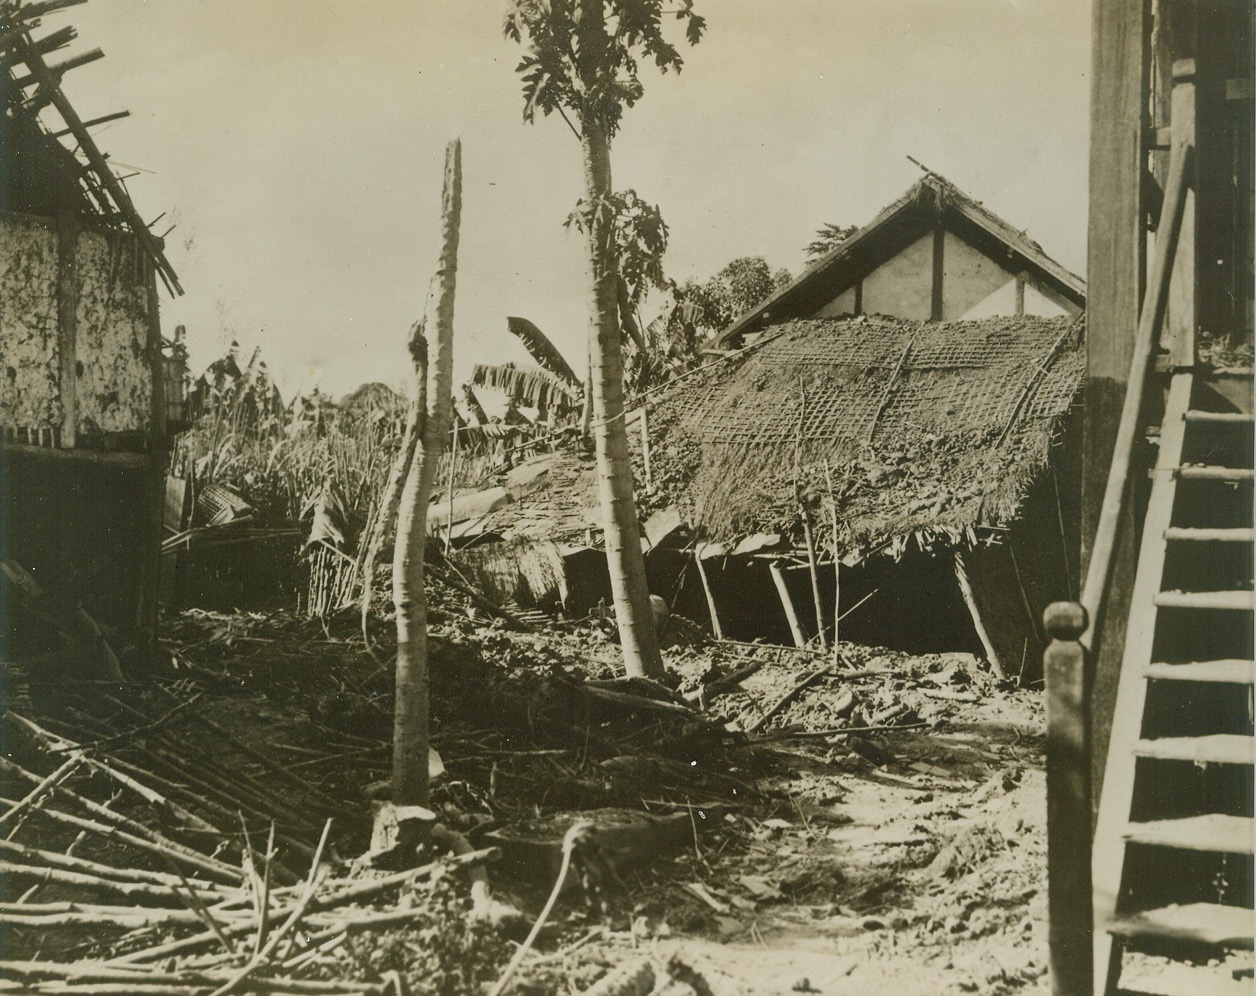 First Picture of Results of Another Undeclared War, 1/27/41  Savannakhet, French Indo China – Bamboo houses in this French Indo China city completely collapse under small Thailand (Siamese) demolition bombs. The now deserted native village of Savannakhet lying on the Mekong River bordering Thailand has been the scene of almost daily raids since the start of an undeclared war between French Indo China and Thailand concerning a border dispute. This is the first picture to reach the United States of this latest outbreak in the Far East.;